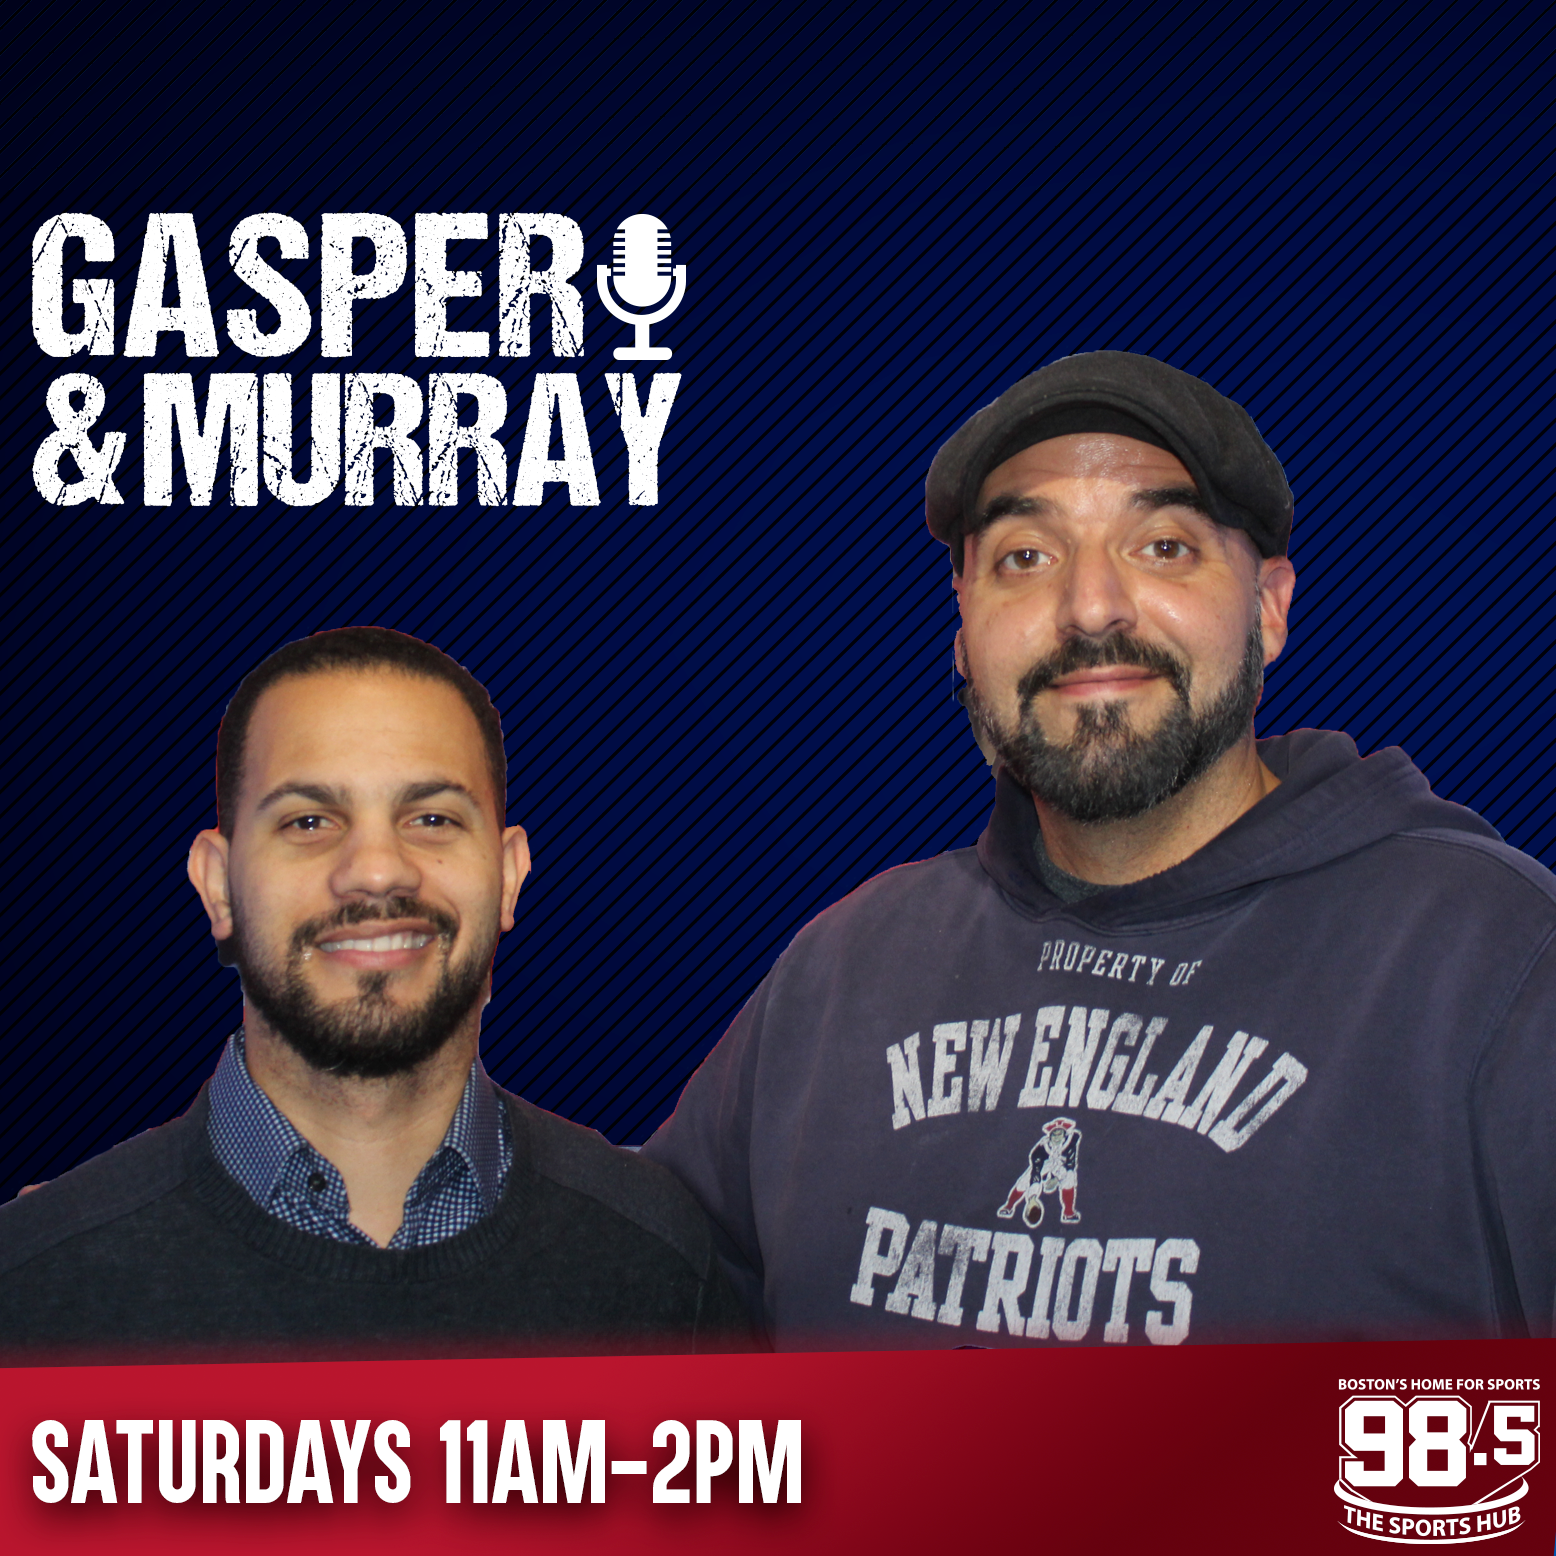 Red Sox opening weekend // Pats improvements // 5 Questions with Gasper (Hour 3)